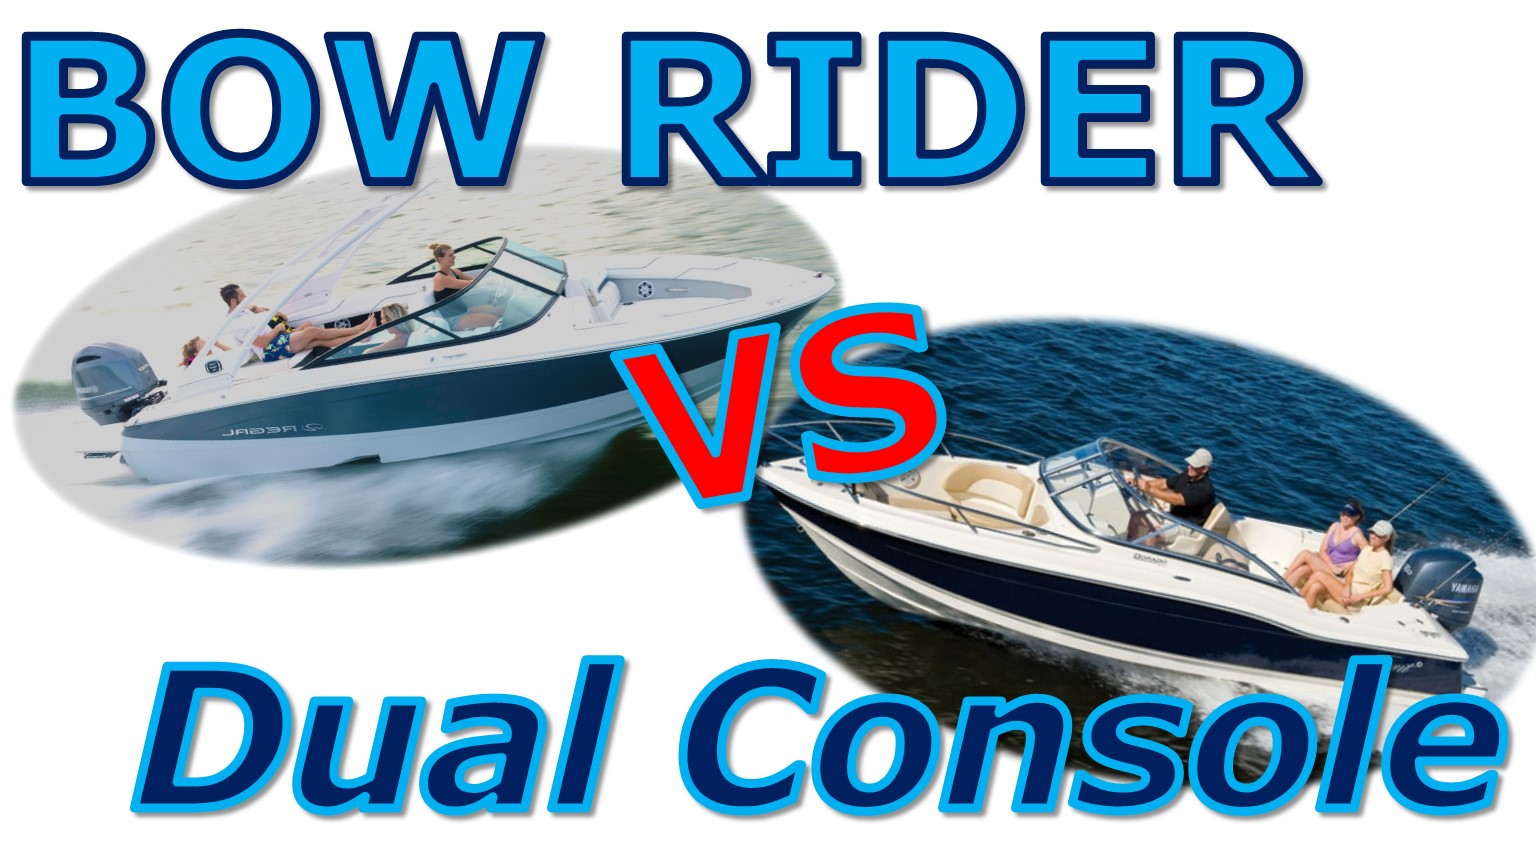 Dual Console vs Bow Rider (Which is Best?)